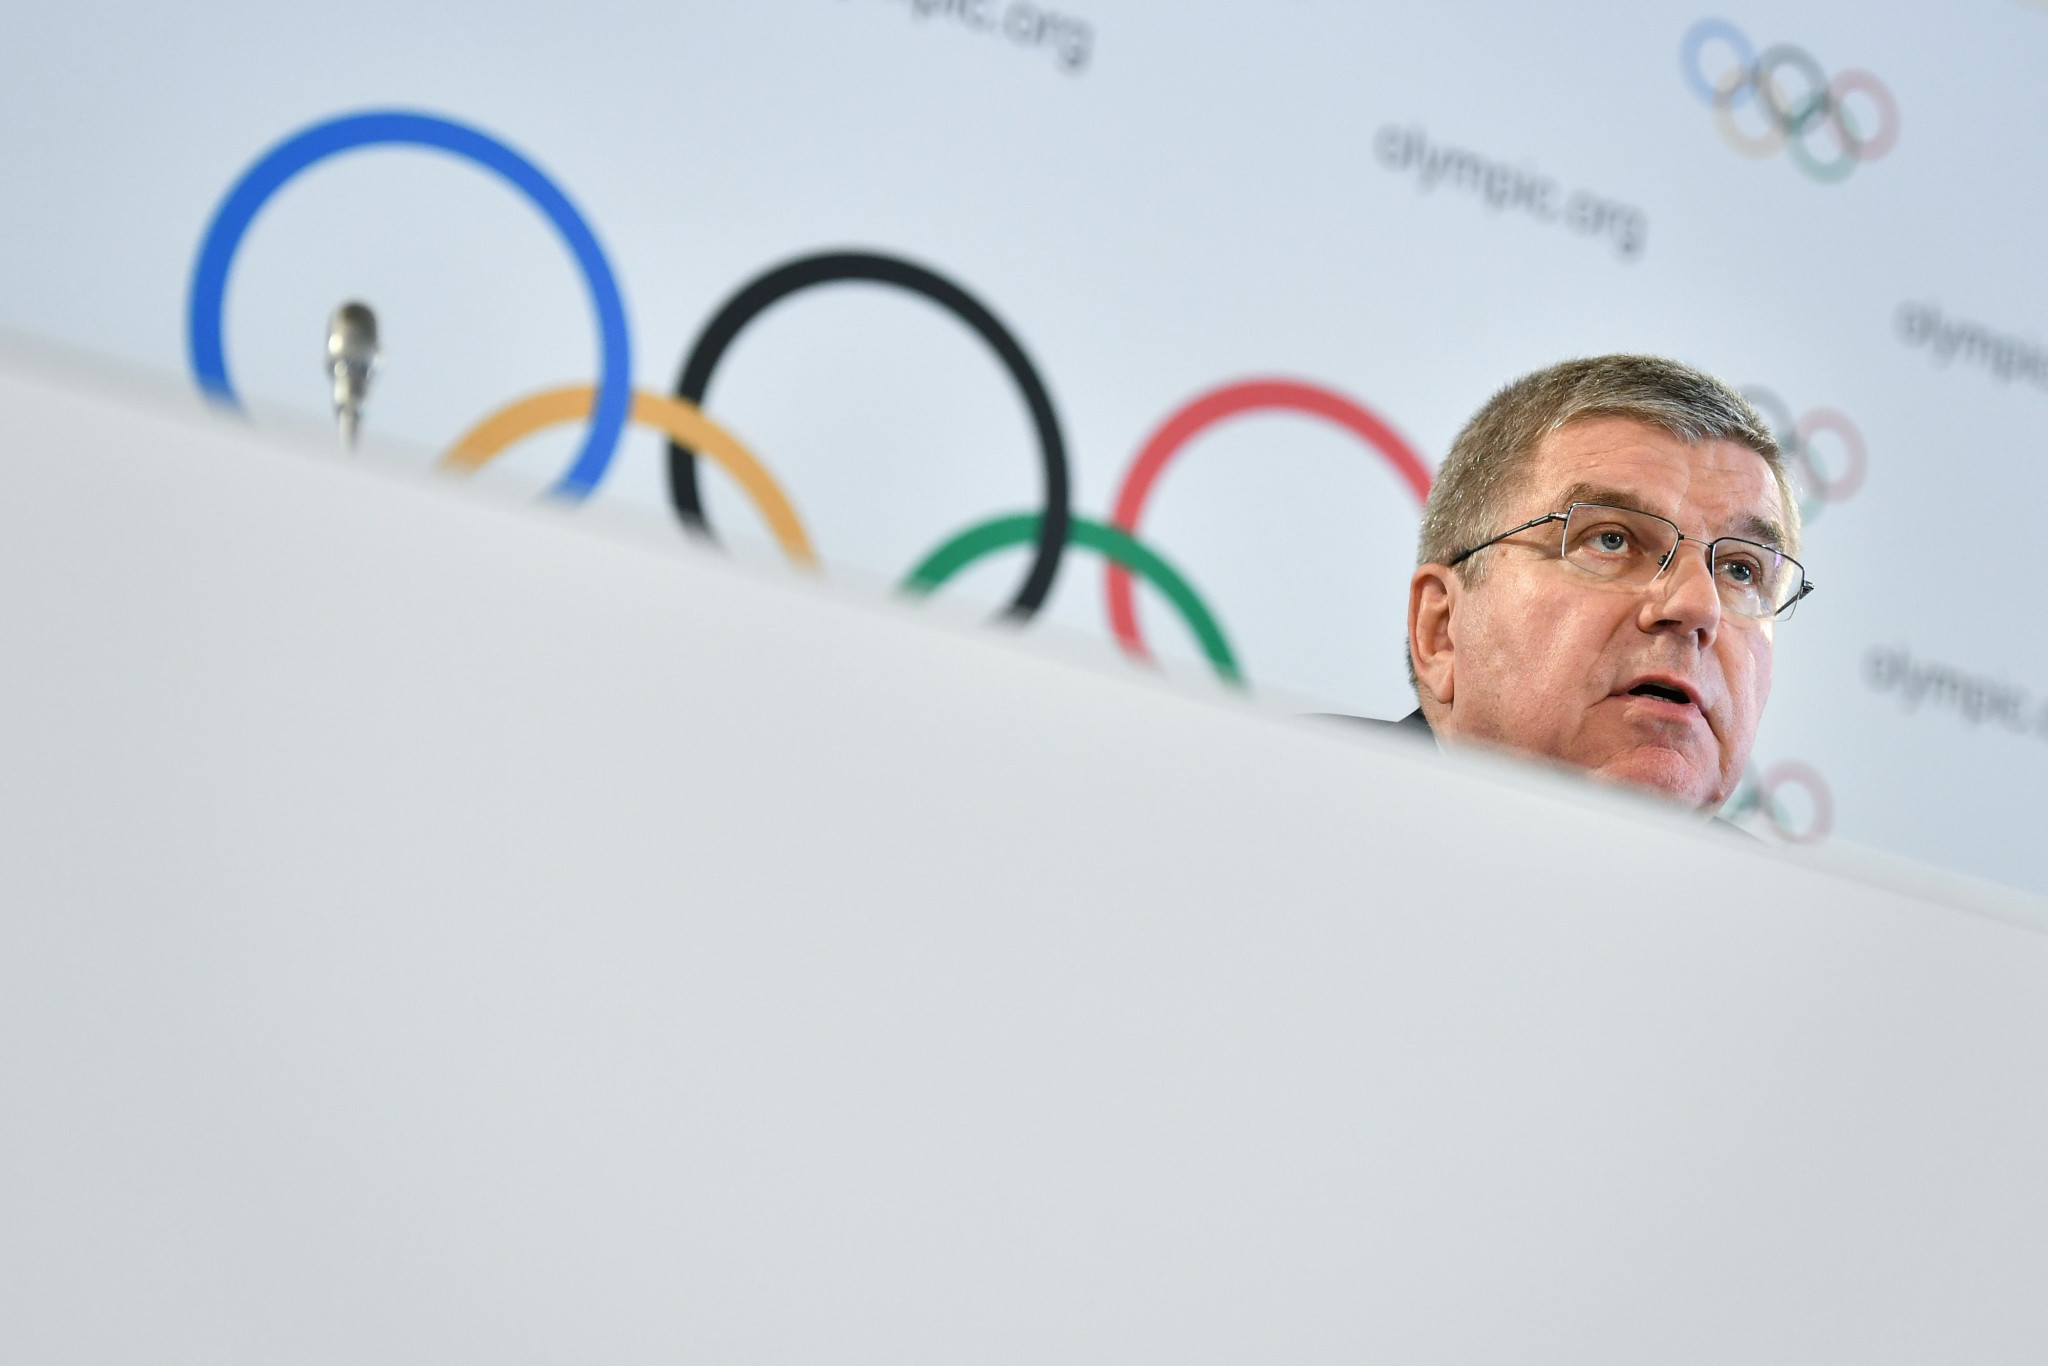 The IOC confirmed additions of new disciplines to the programme last week ©Getty Images